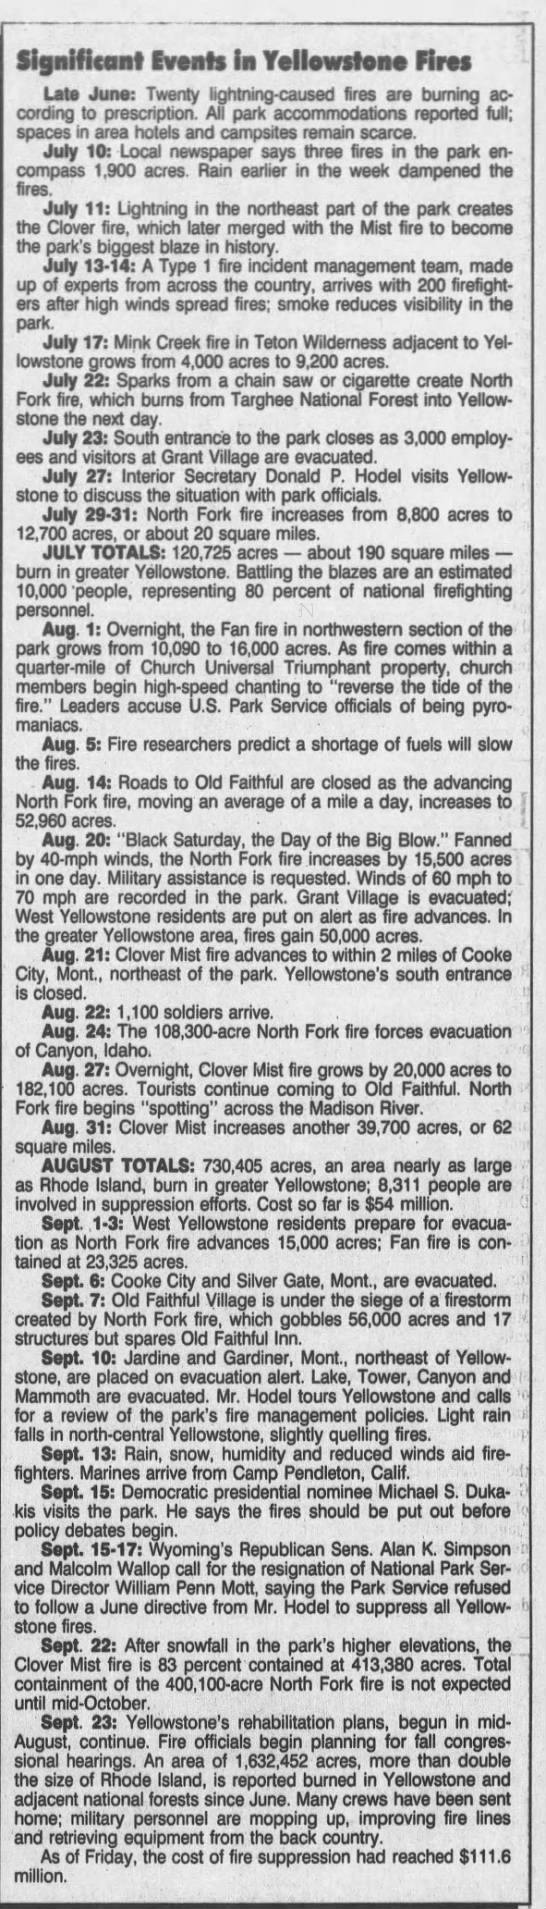 Yellowstone fire timeline - 1988 - 